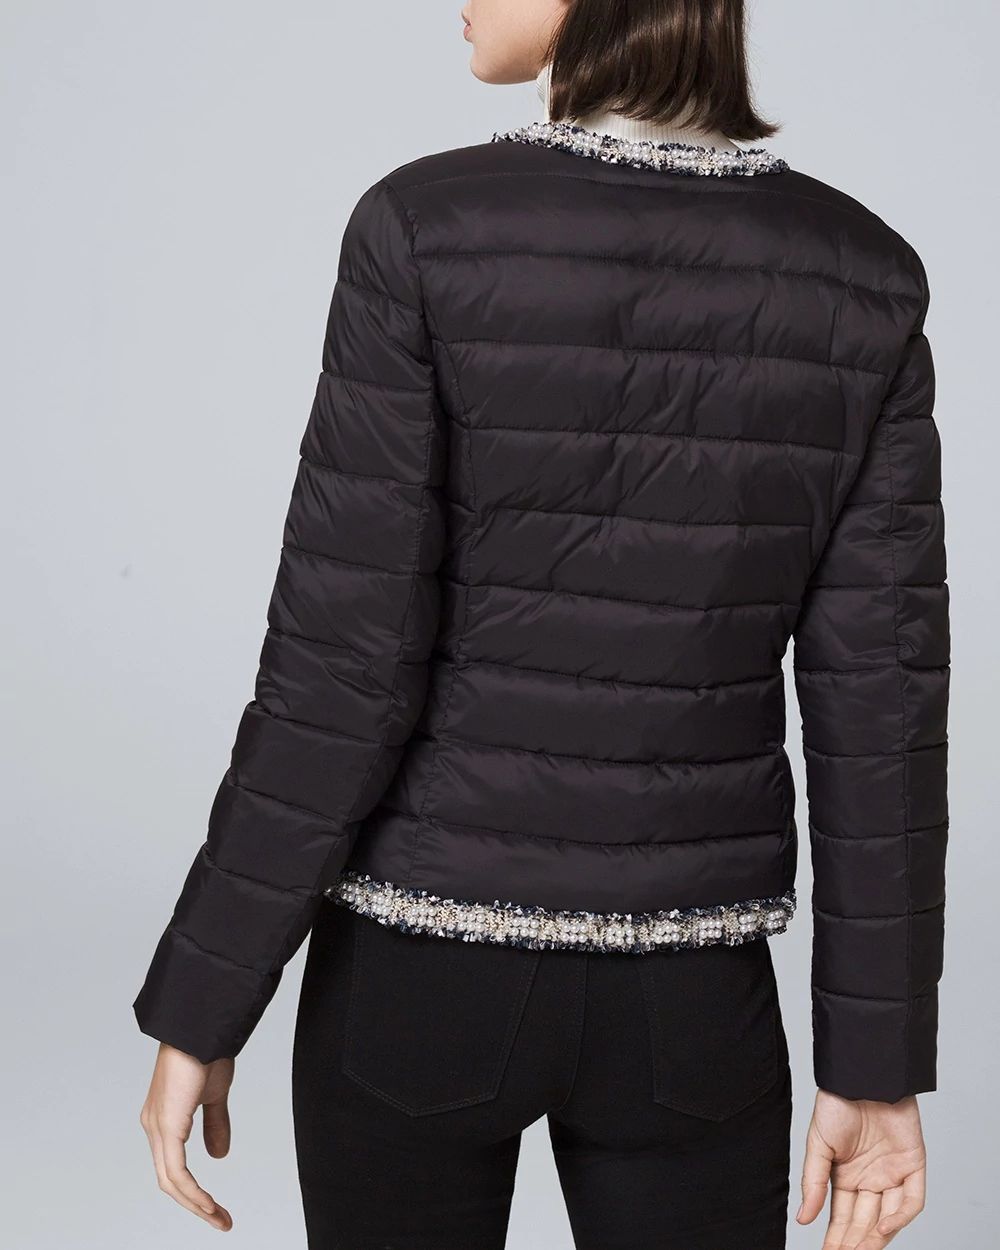 Embellished Puffer Jacket click to view larger image.